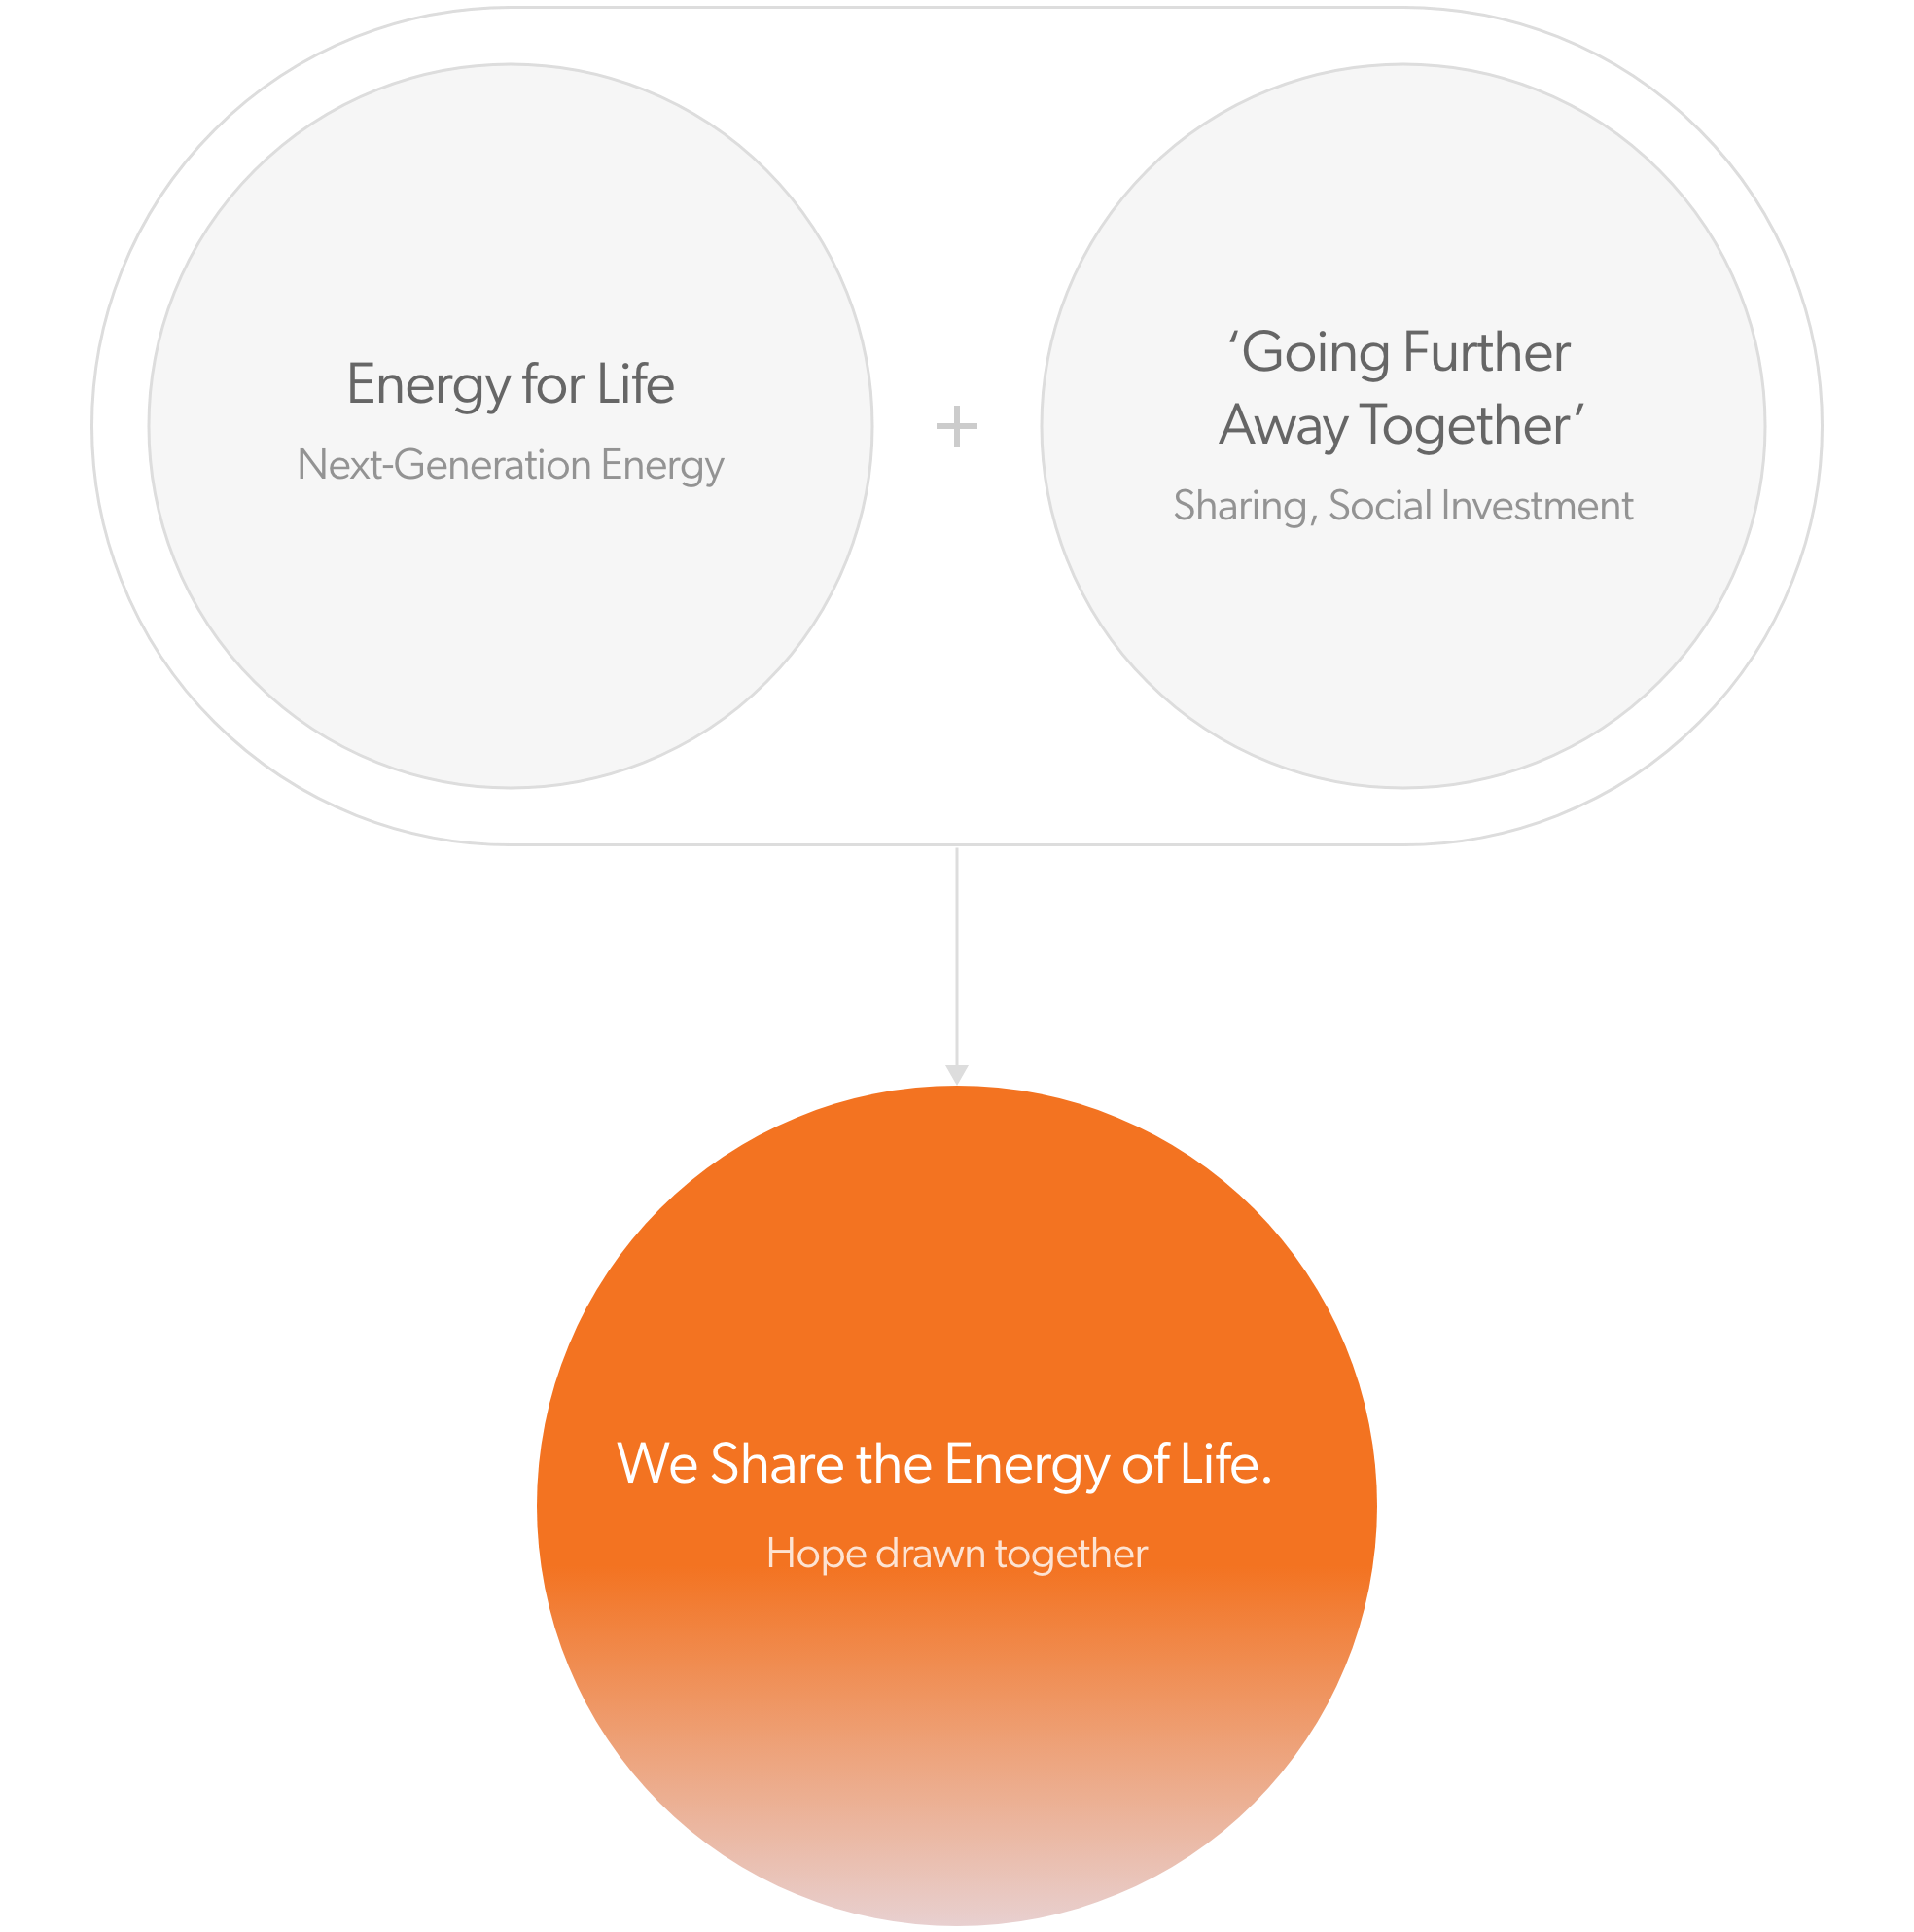 Energy to build tomorrow + 'Going Further together'(Sharing,Socail Investment) = 'We share the energy of life'(Hope drawn together)  